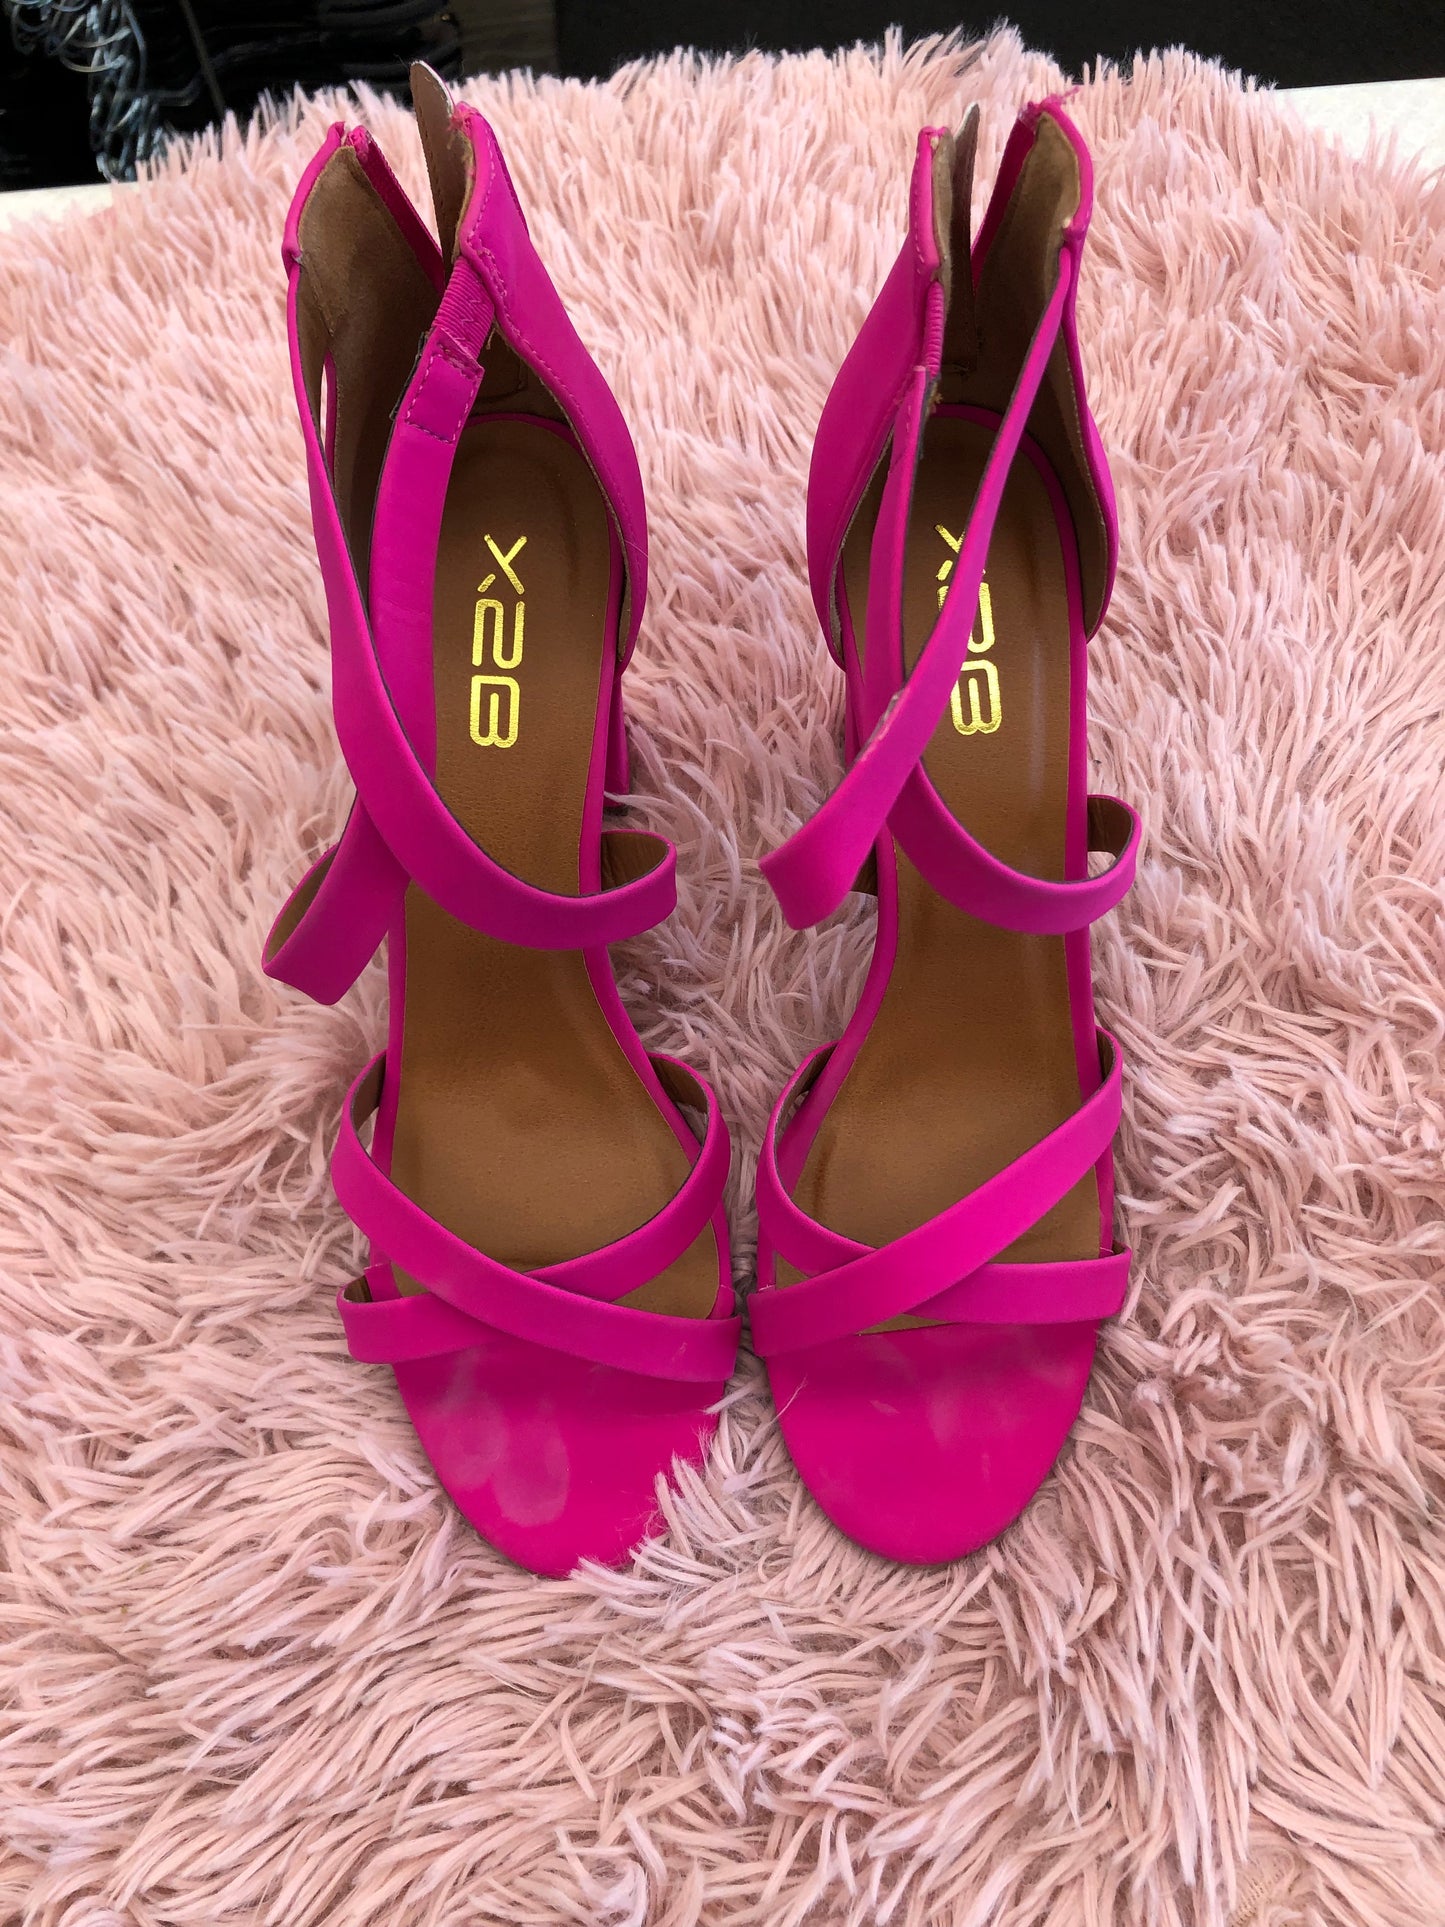 Hot Pink Shoes Heels Block Clothes Mentor, Size 10